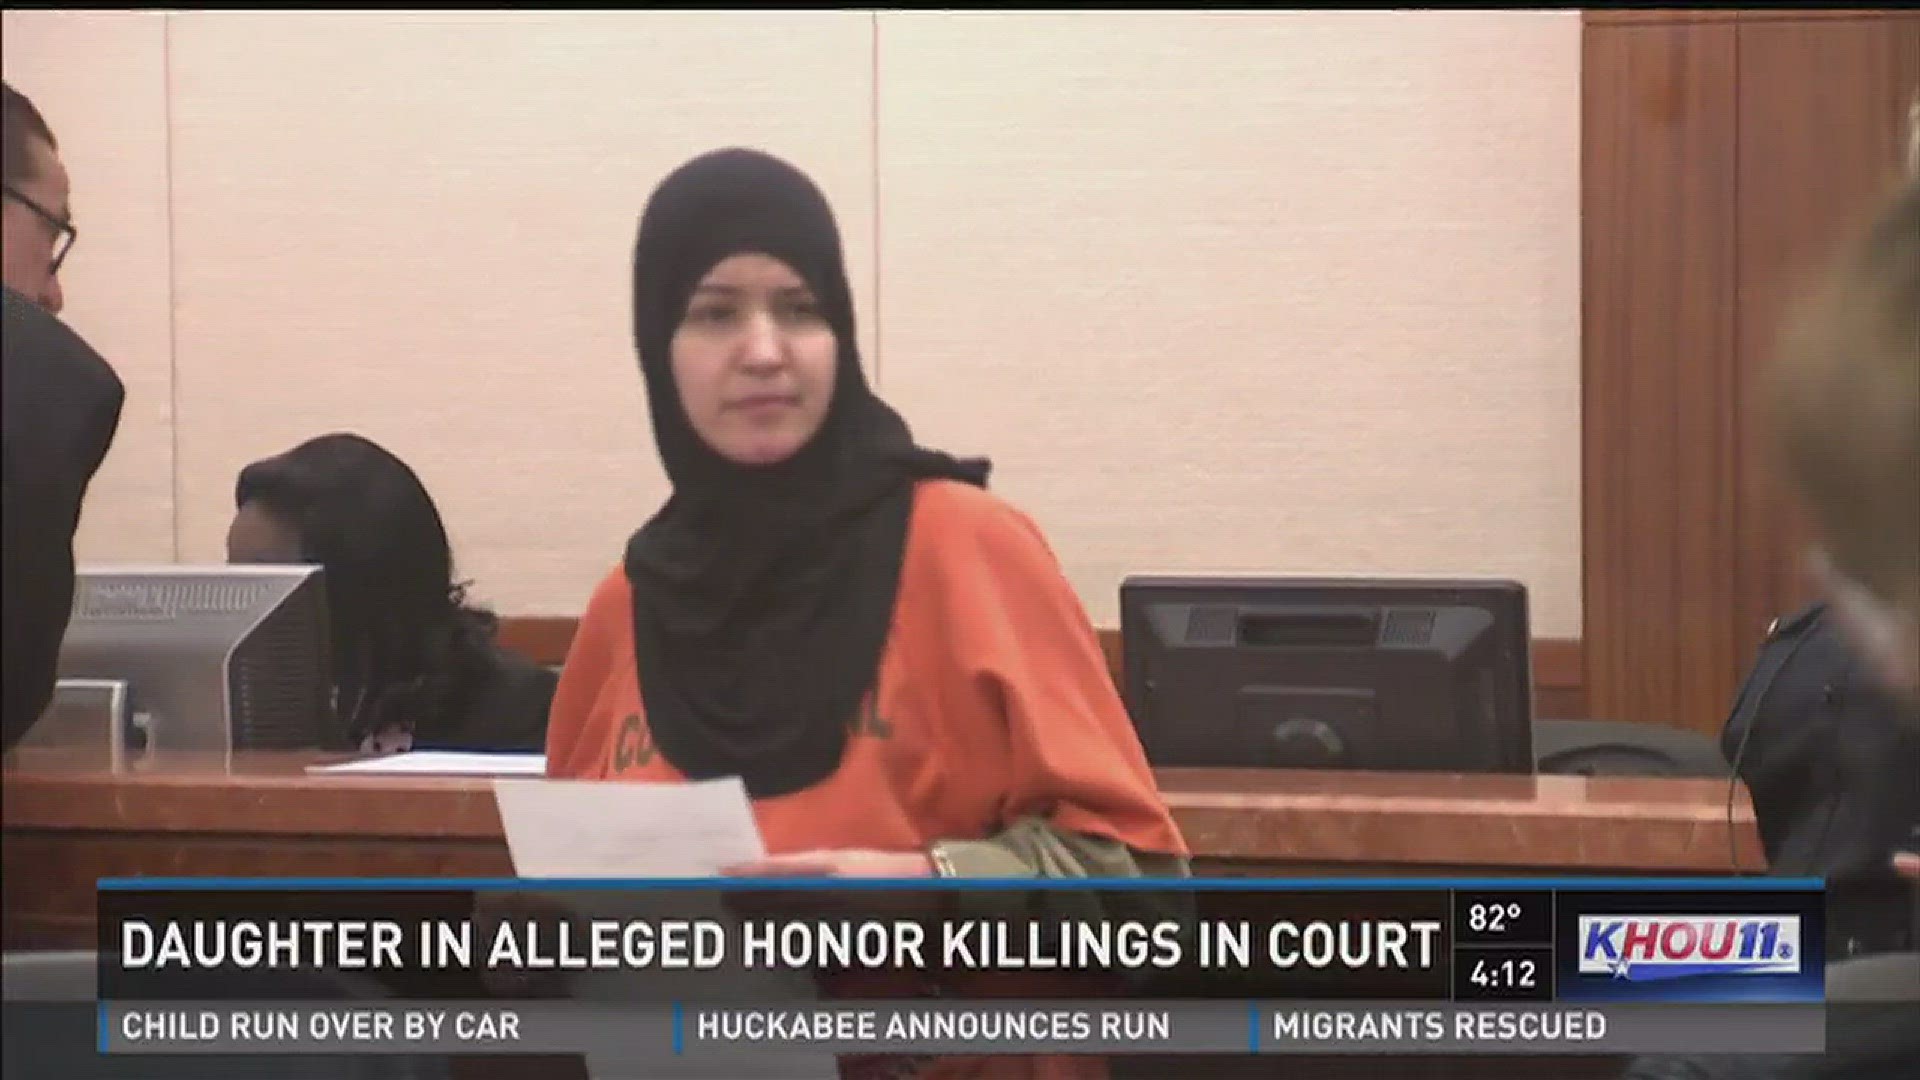 Daughter in alleged honor killings in court.